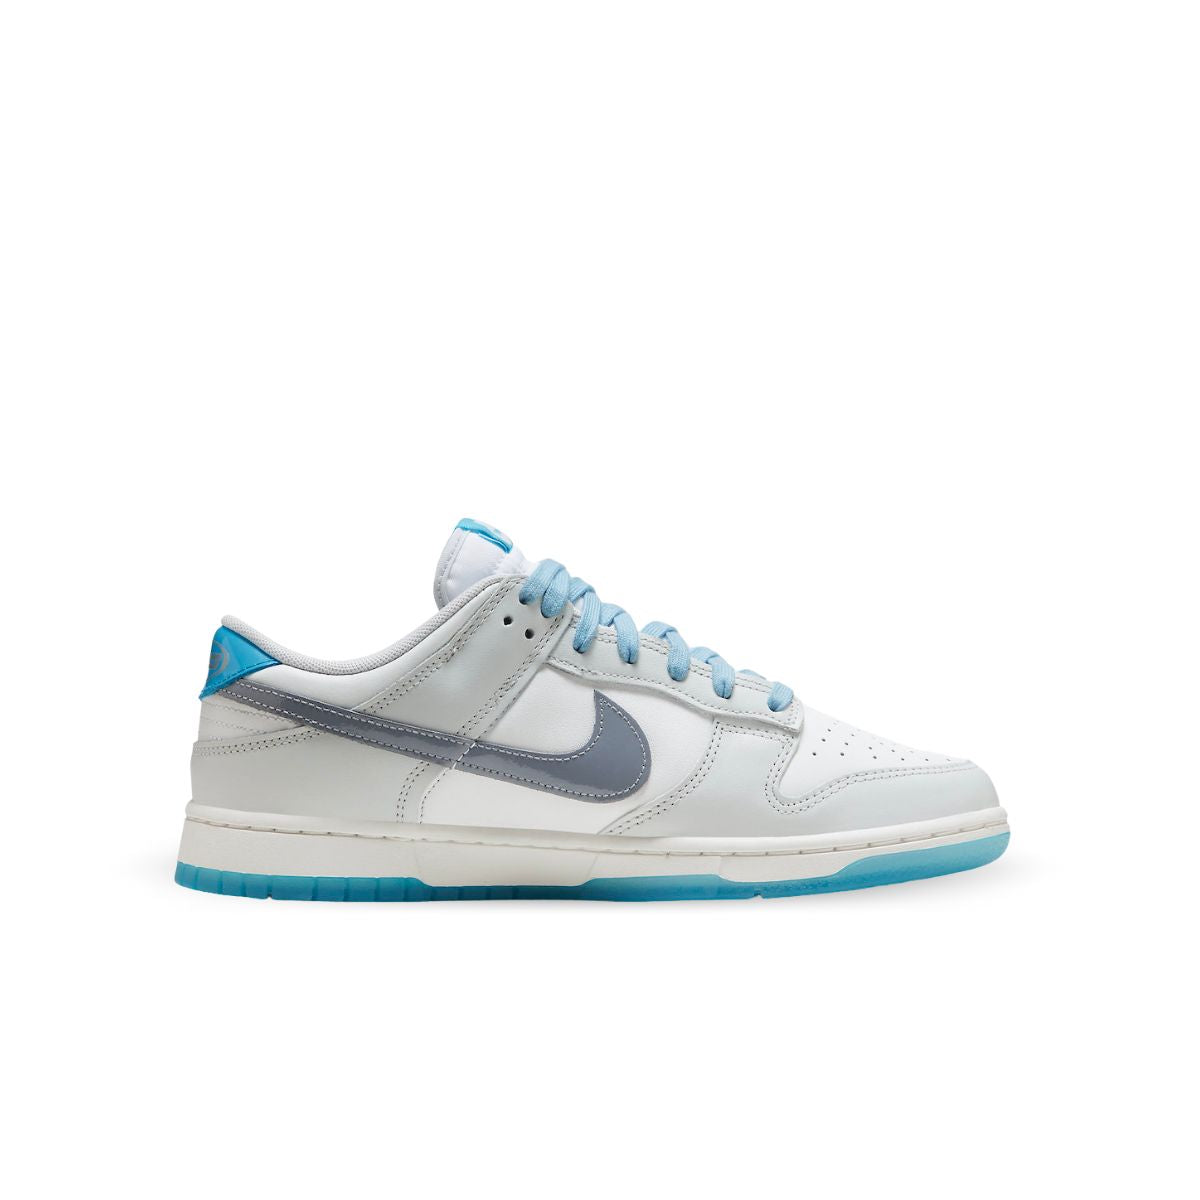 Light Blue Nike Dunks Shoelace Replacements